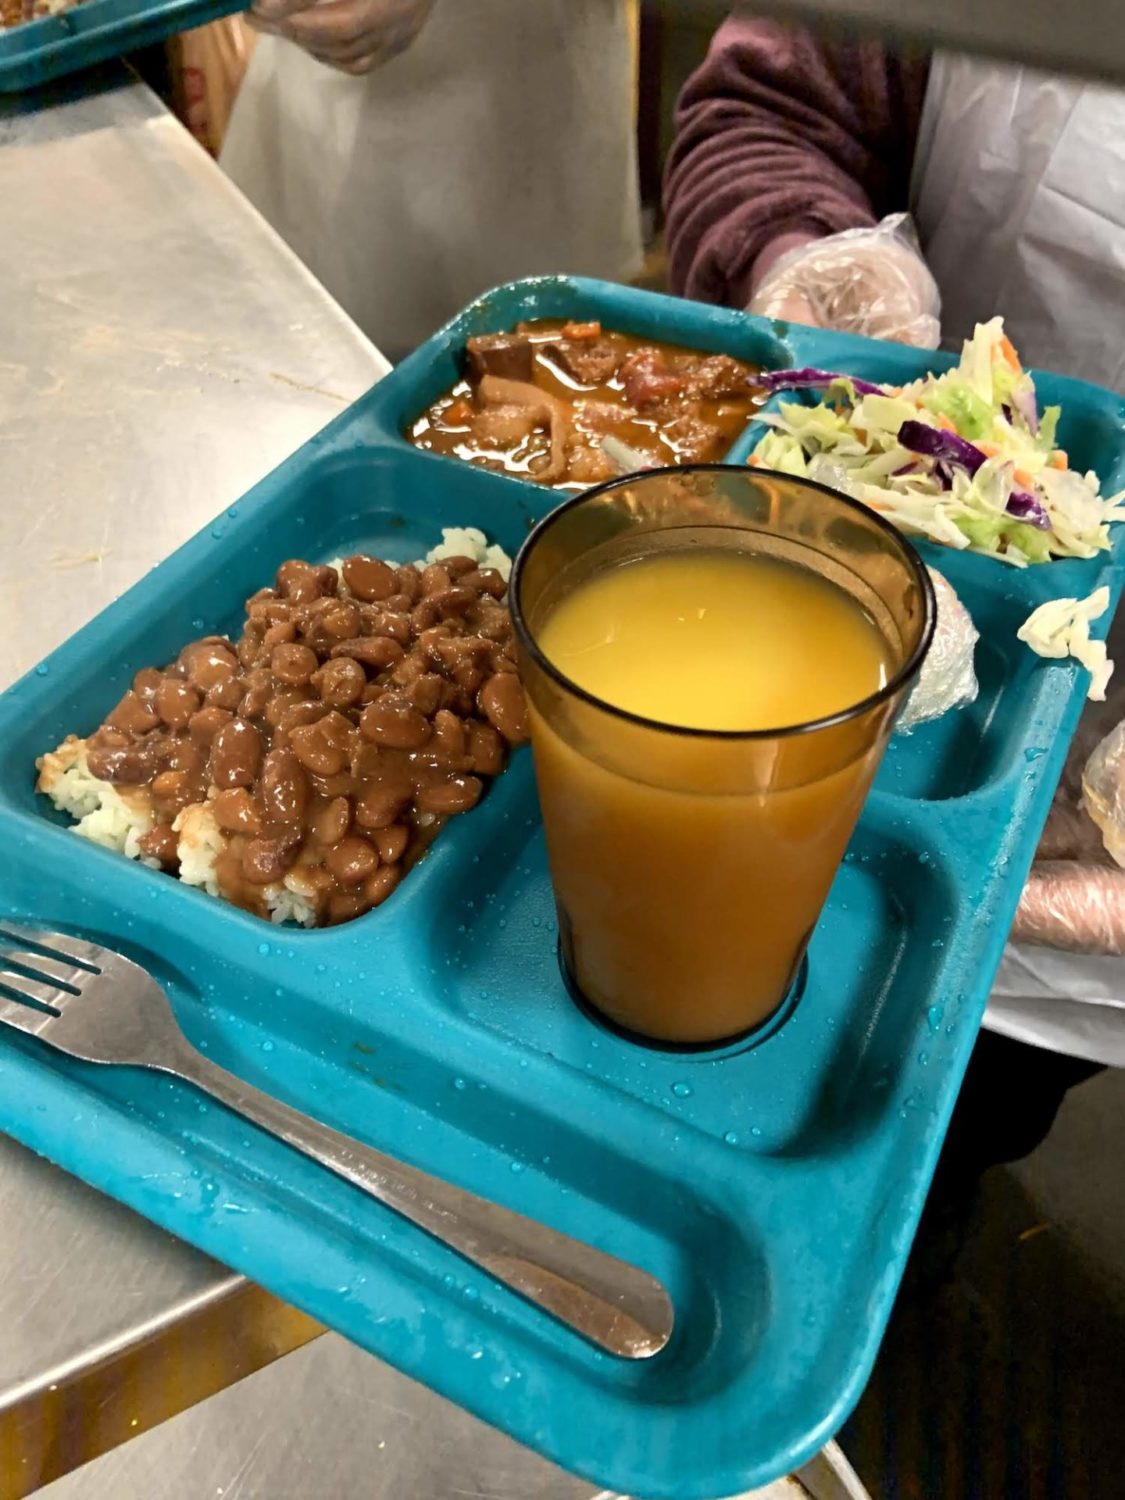 Midnight Mission meal tray